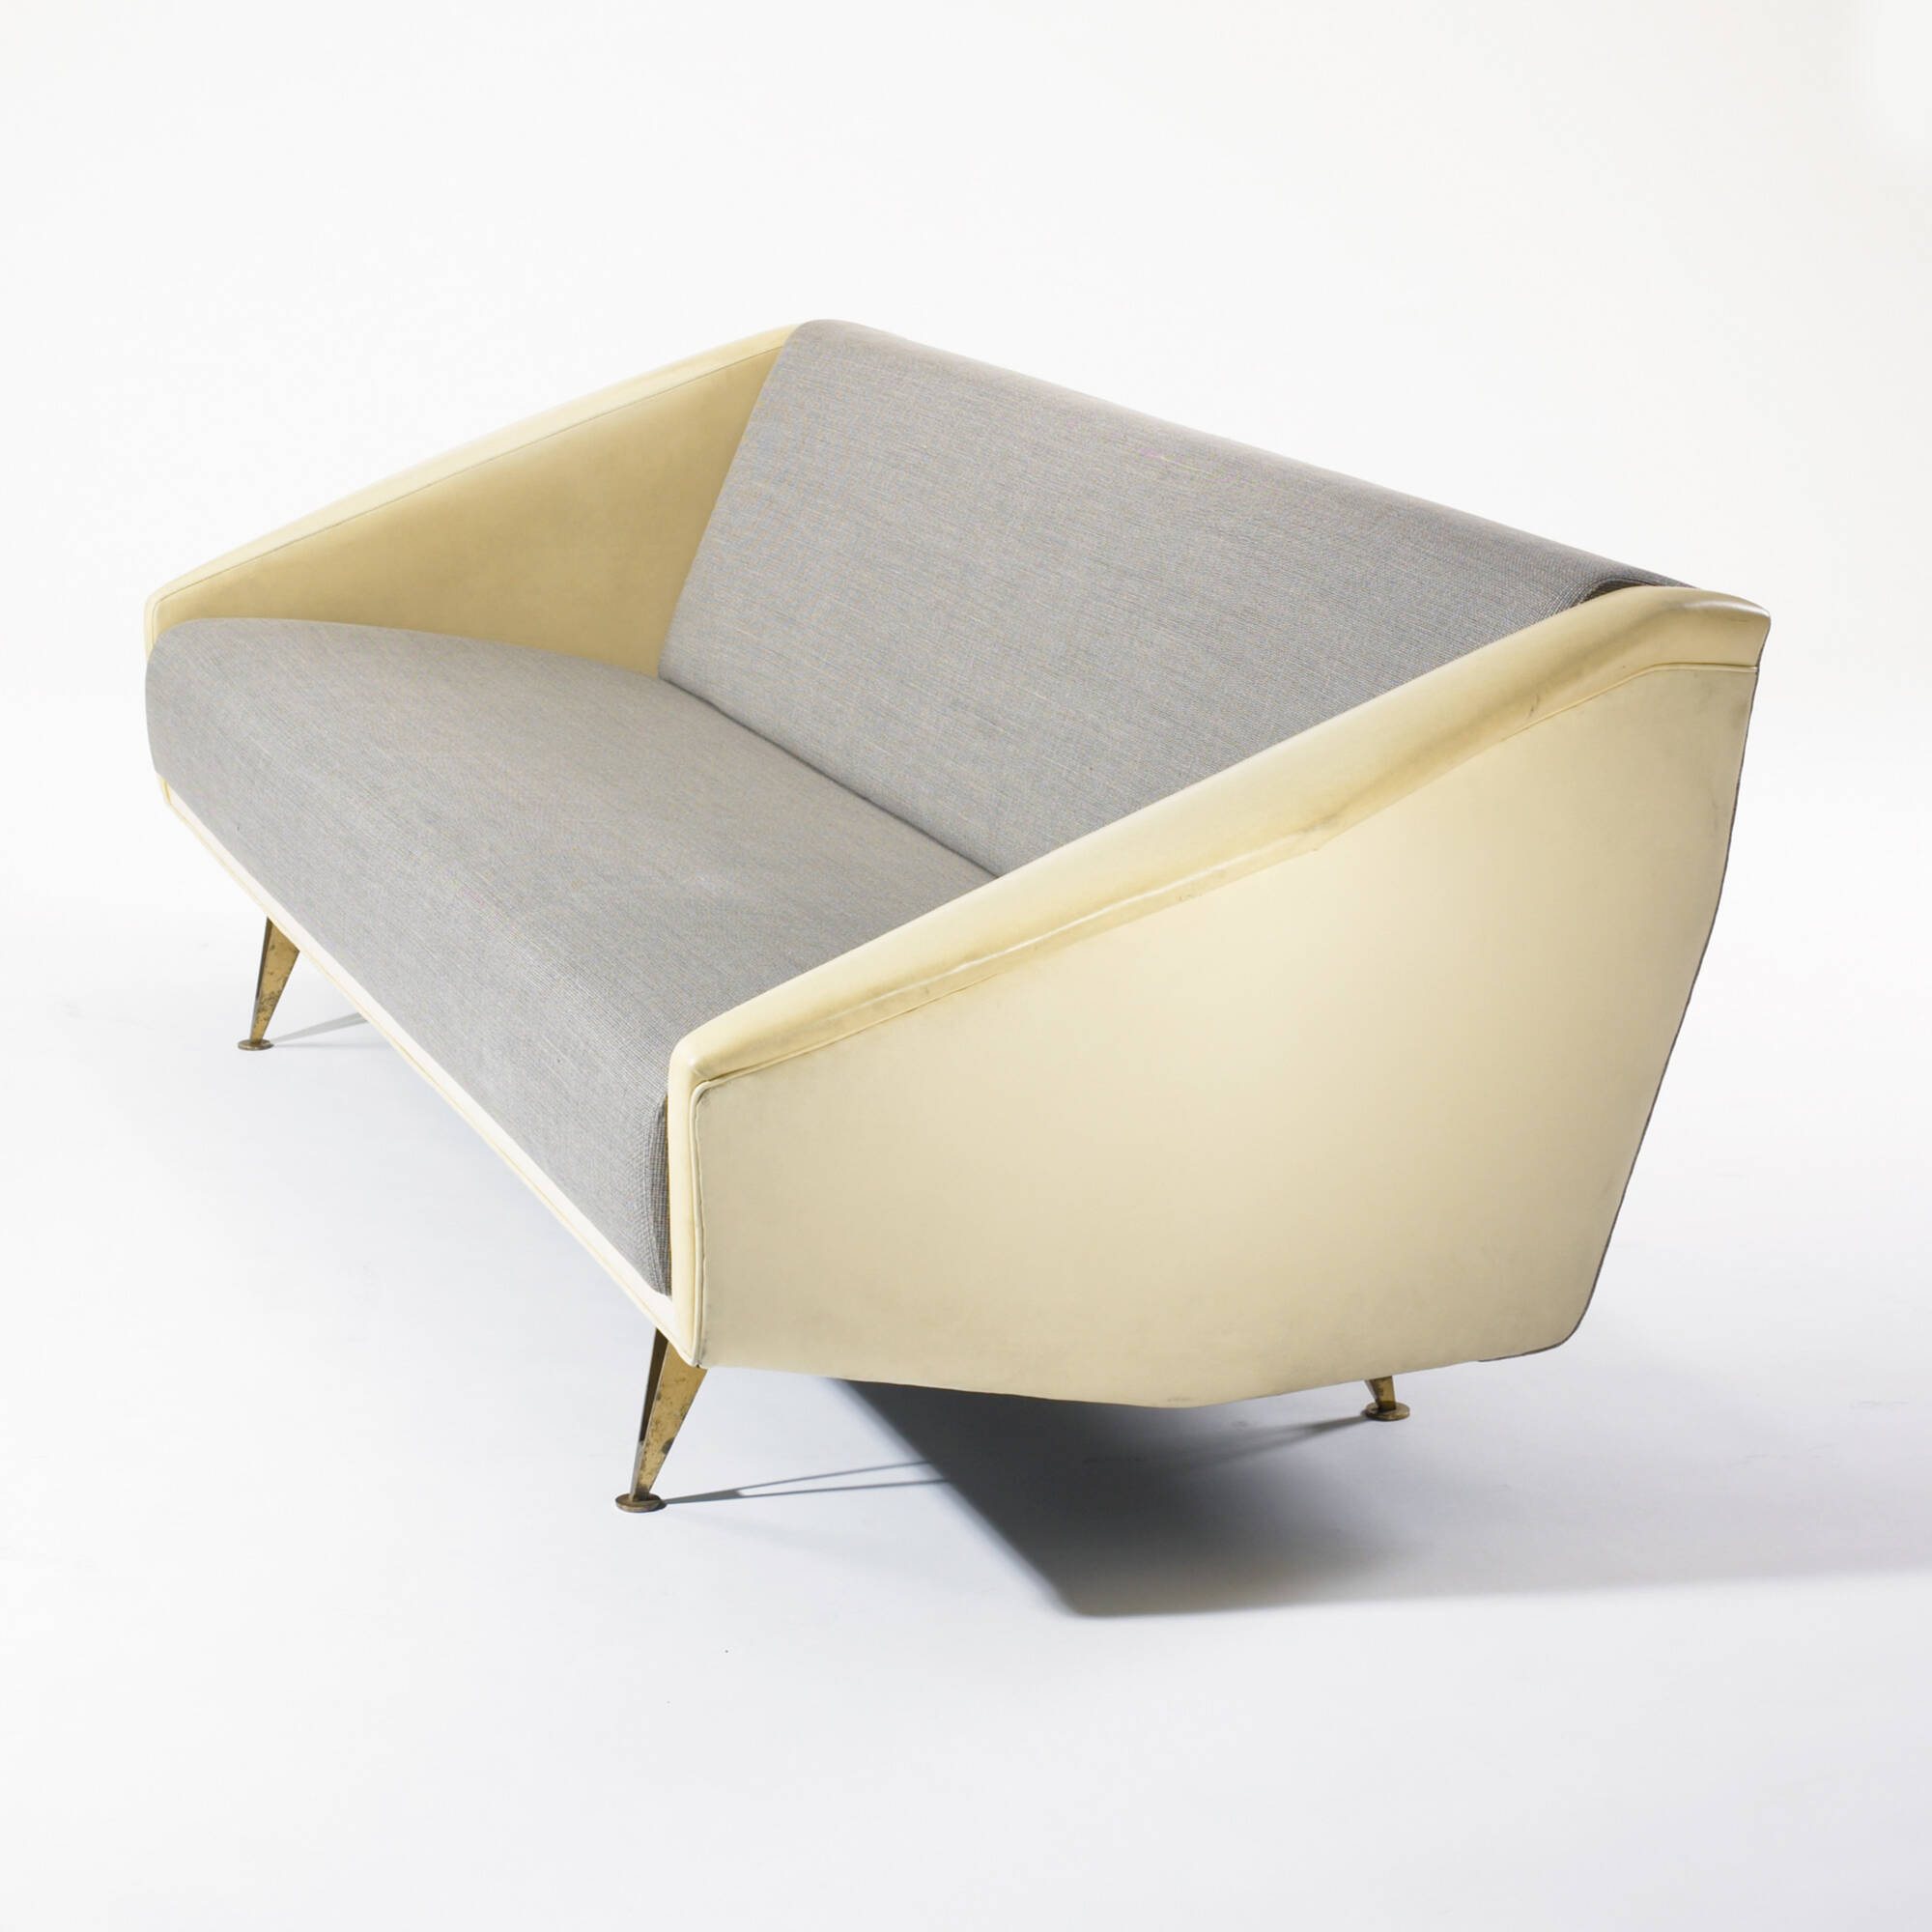 kaart Kneden Nationaal 141: GIO PONTI, Diamond sofa < Important Design, 2 June 2009 < Auctions |  Wright: Auctions of Art and Design